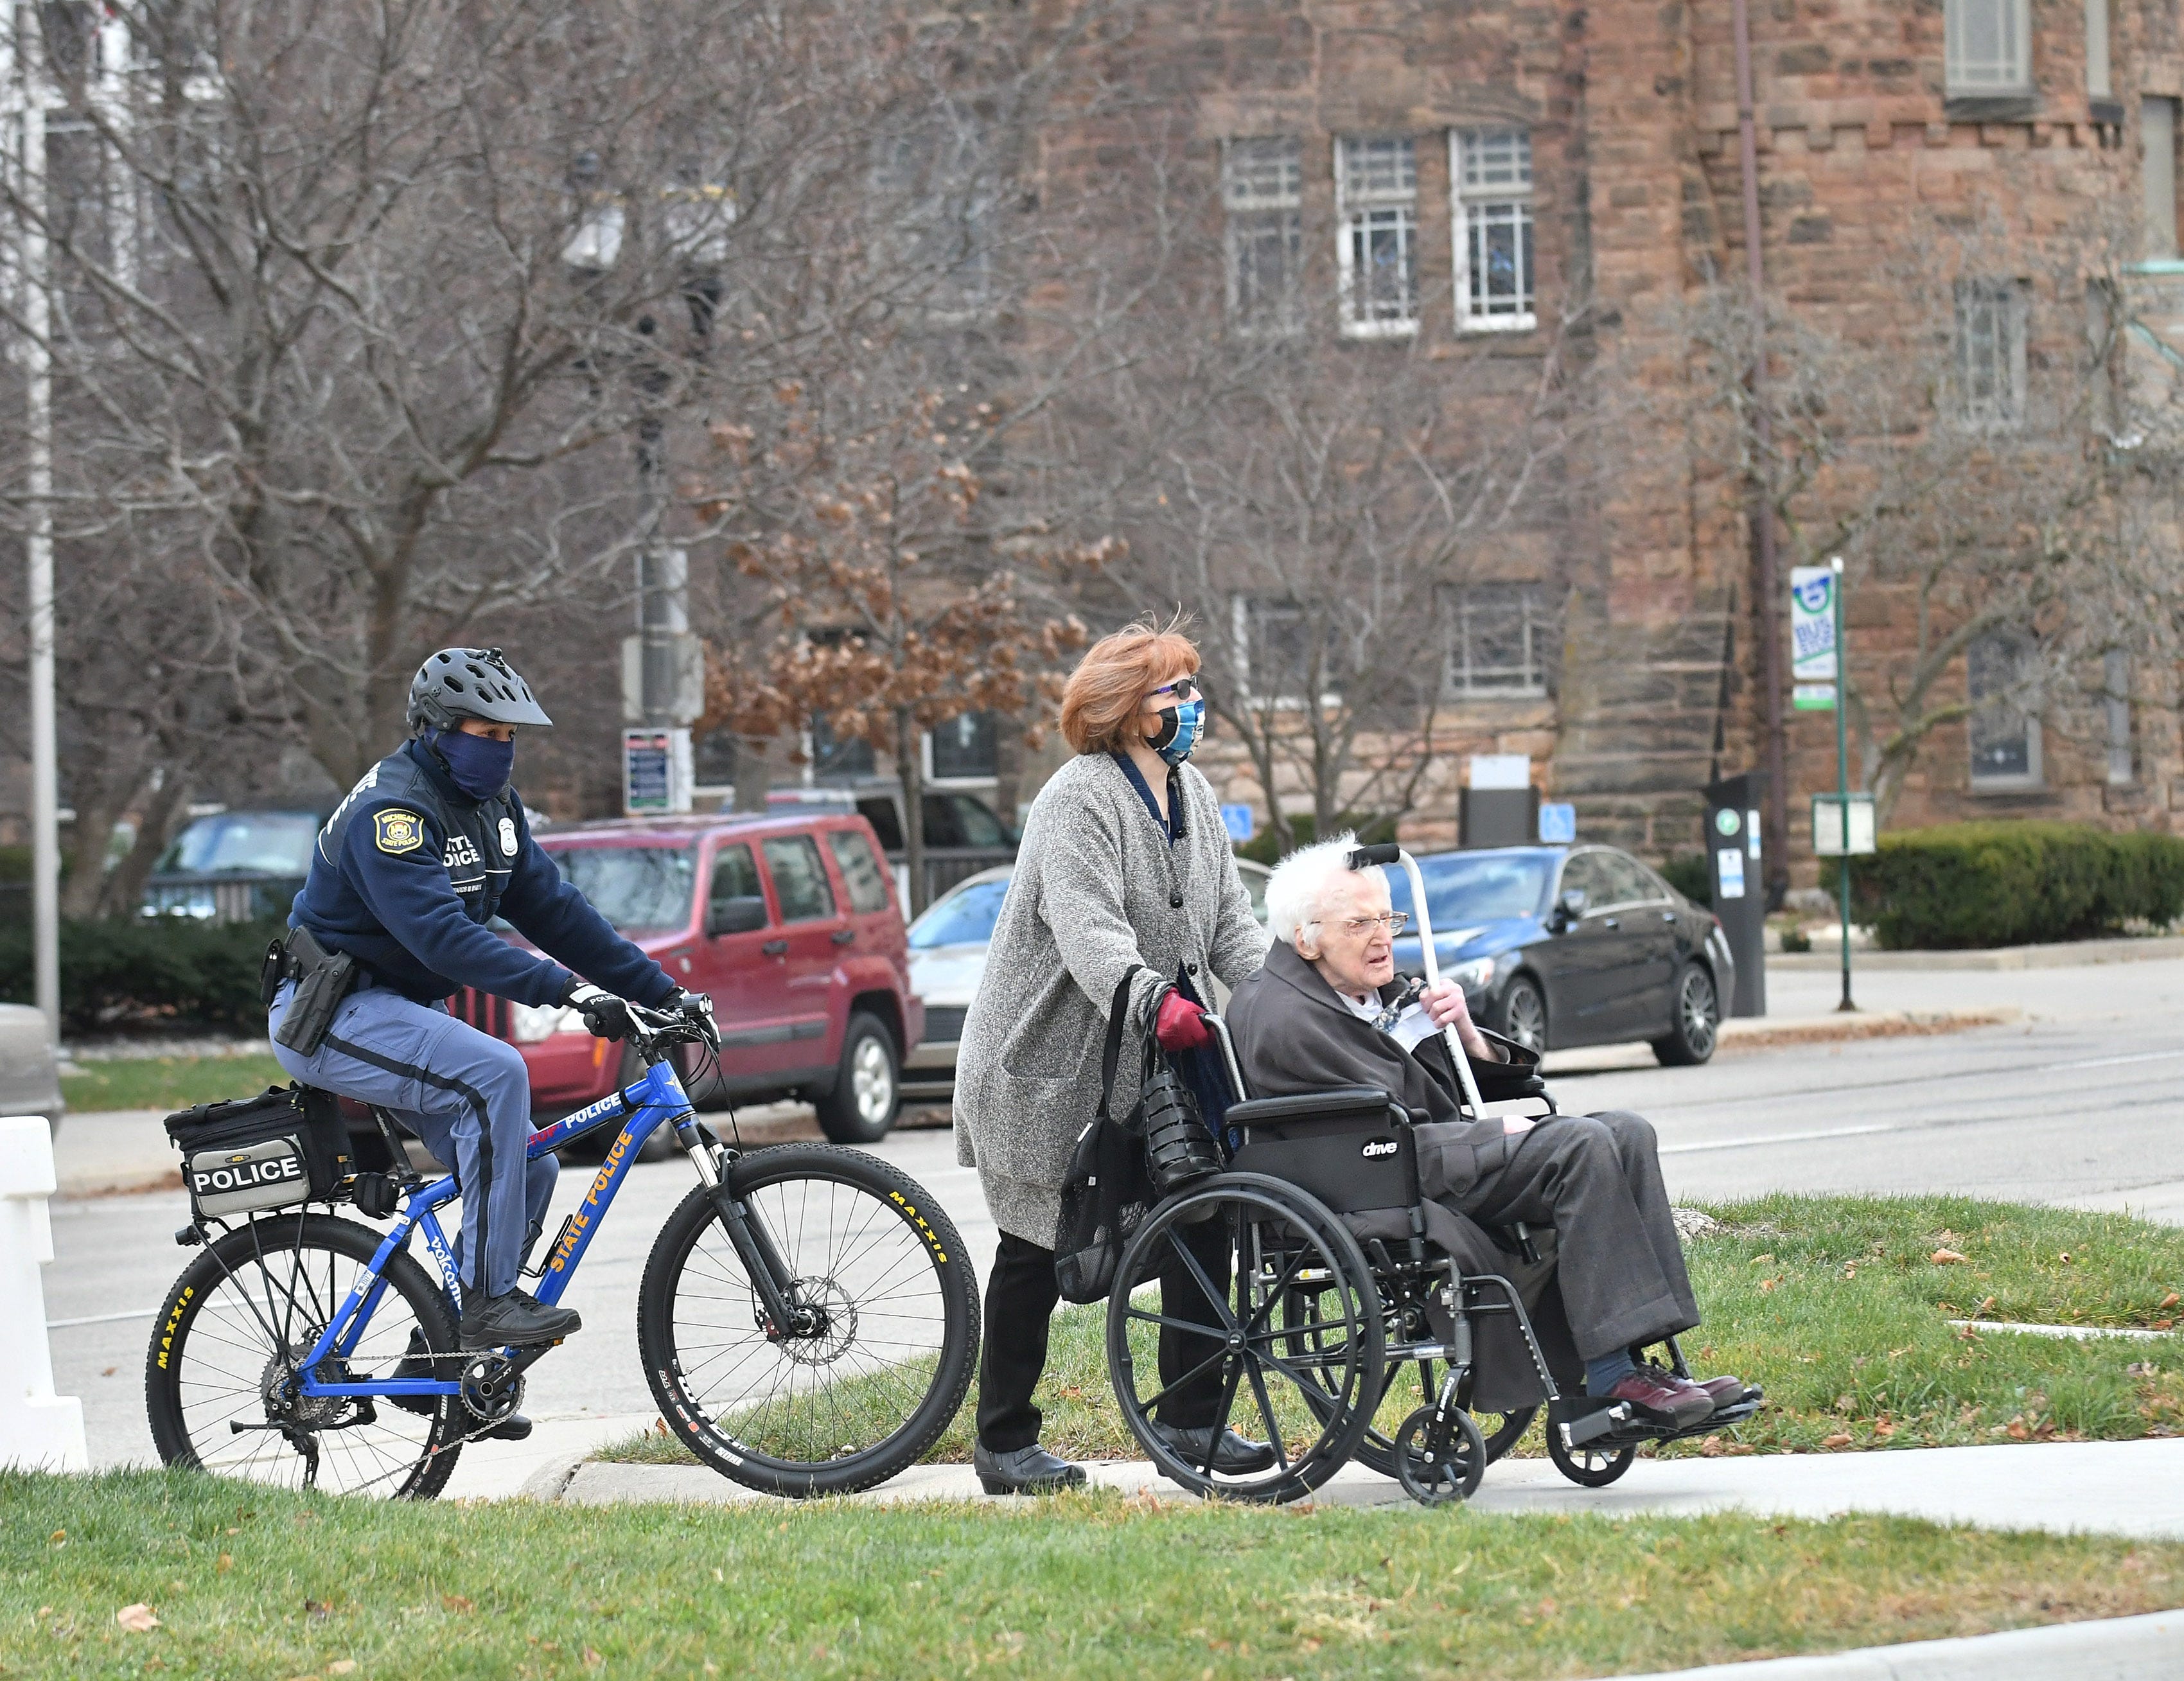 Michigan State Police officers escort Democratic elector Michael Kerwin, 96, with his daughter, Katie Kerwin from the parking garage to the Michigan State Capitol in Lansing, Mich. on Dec. 14, 2020.   The electors are casting their votes today at the capitol for the president and vice president.